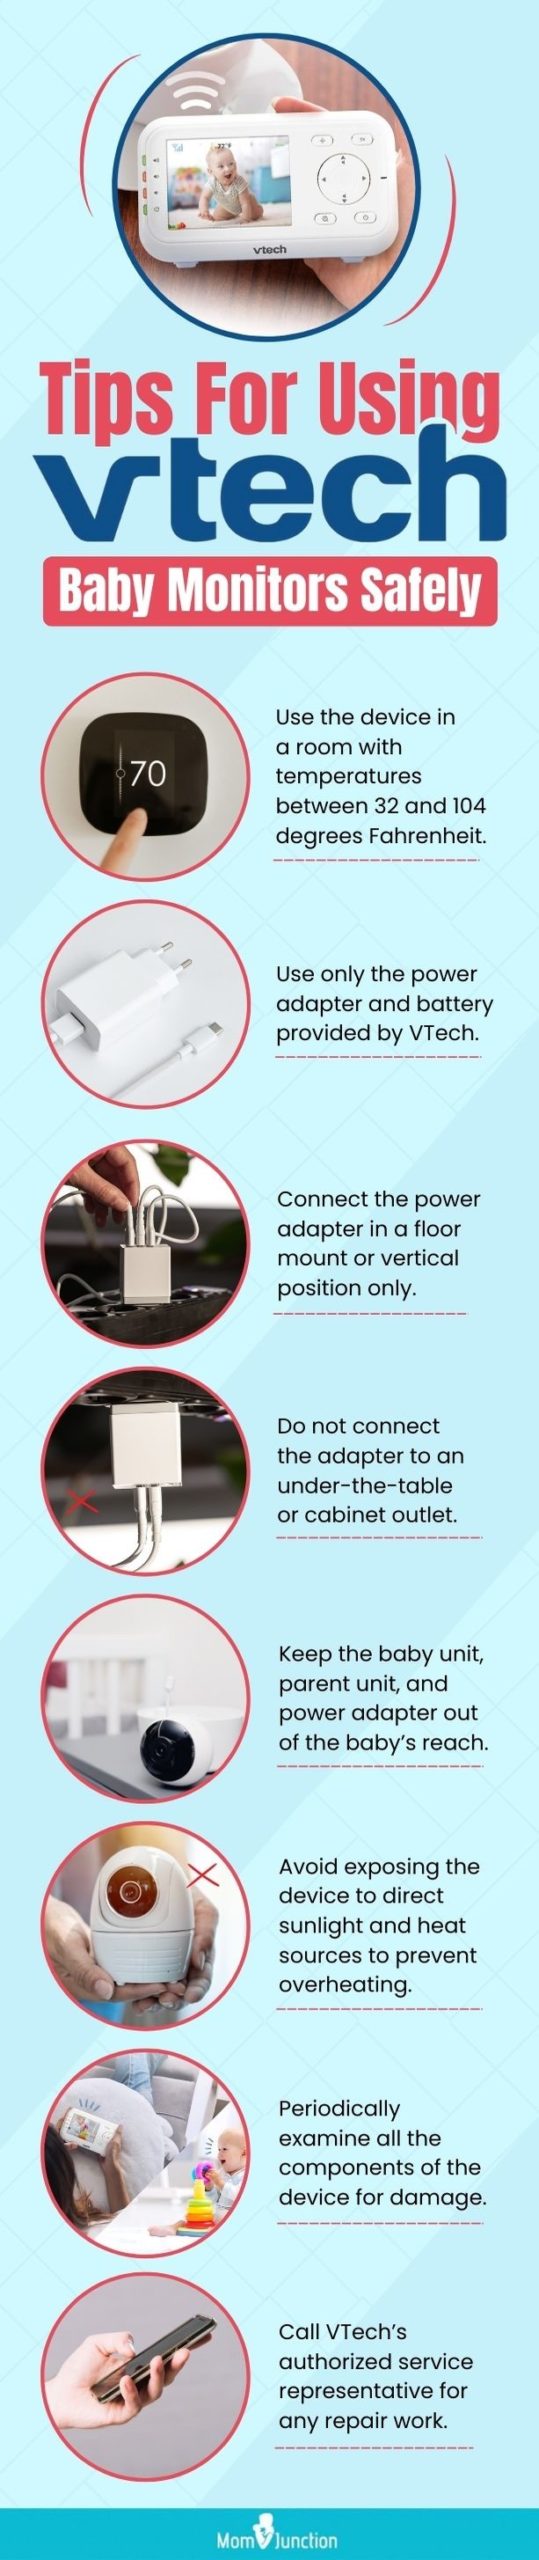 VTech Baby Monitors (infographic)